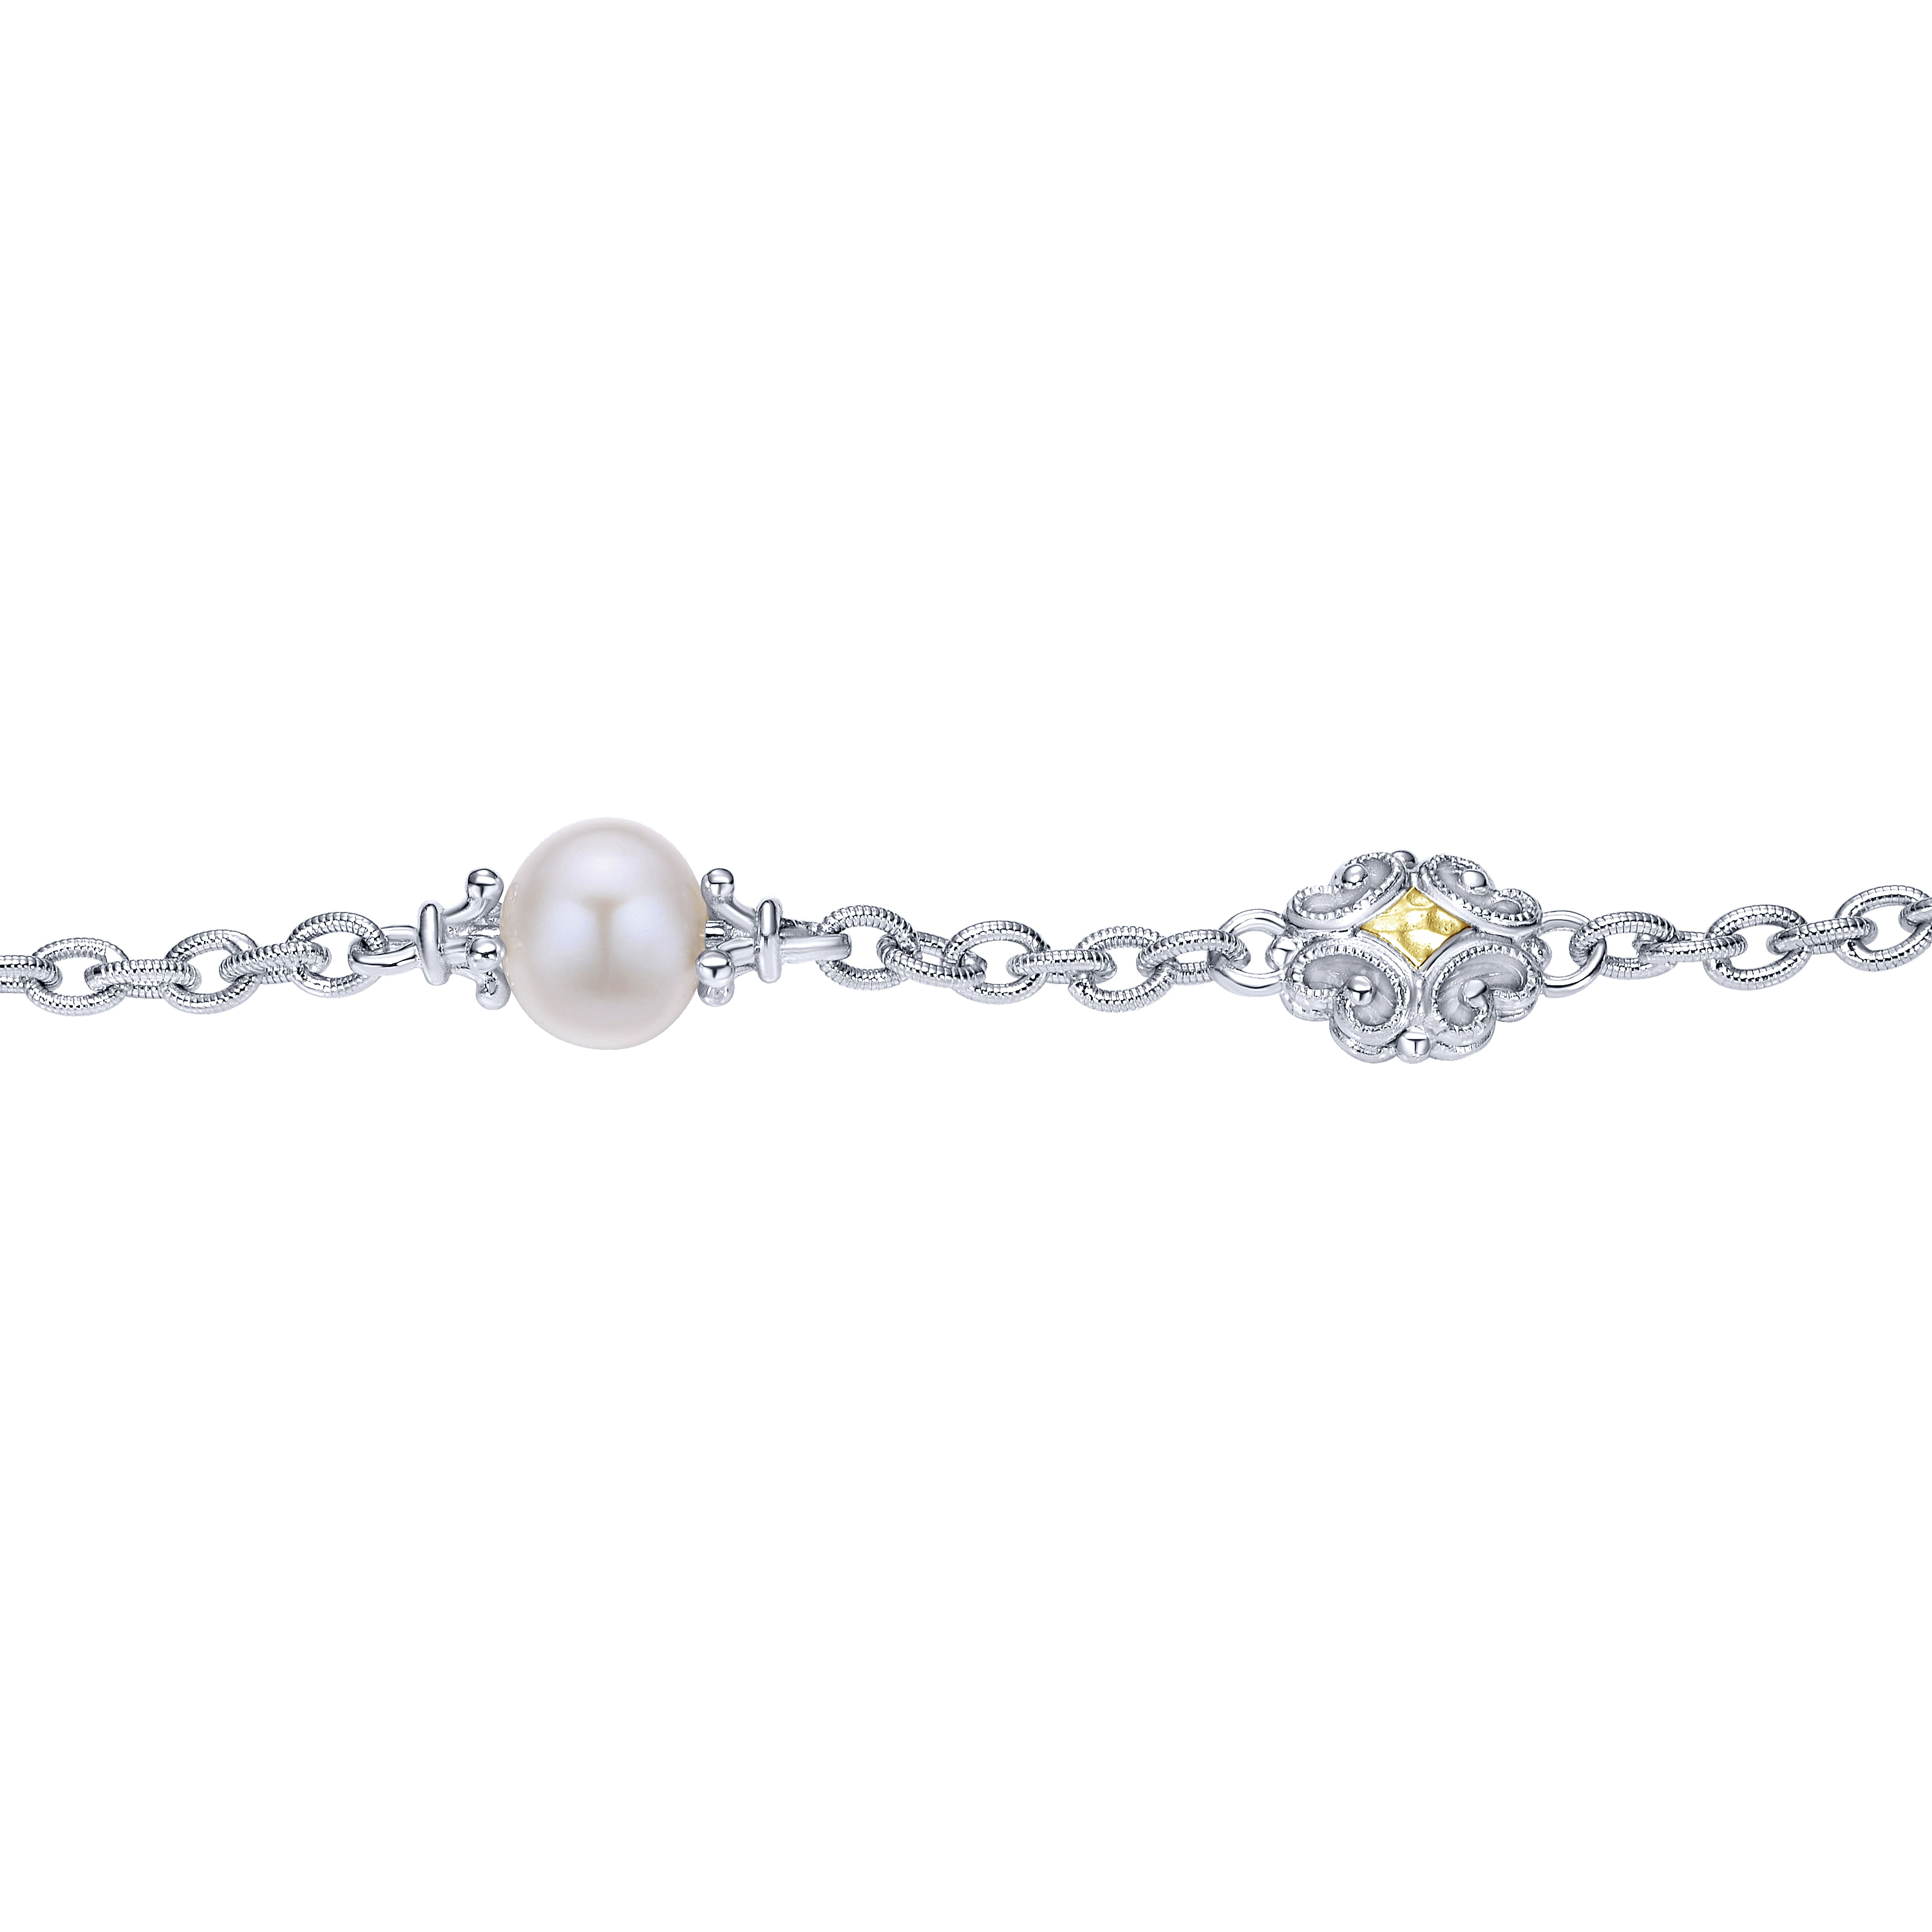 925 Sterling Silver-18K Yellow Gold Chain Bracelet with Pearls and Filigree Stations